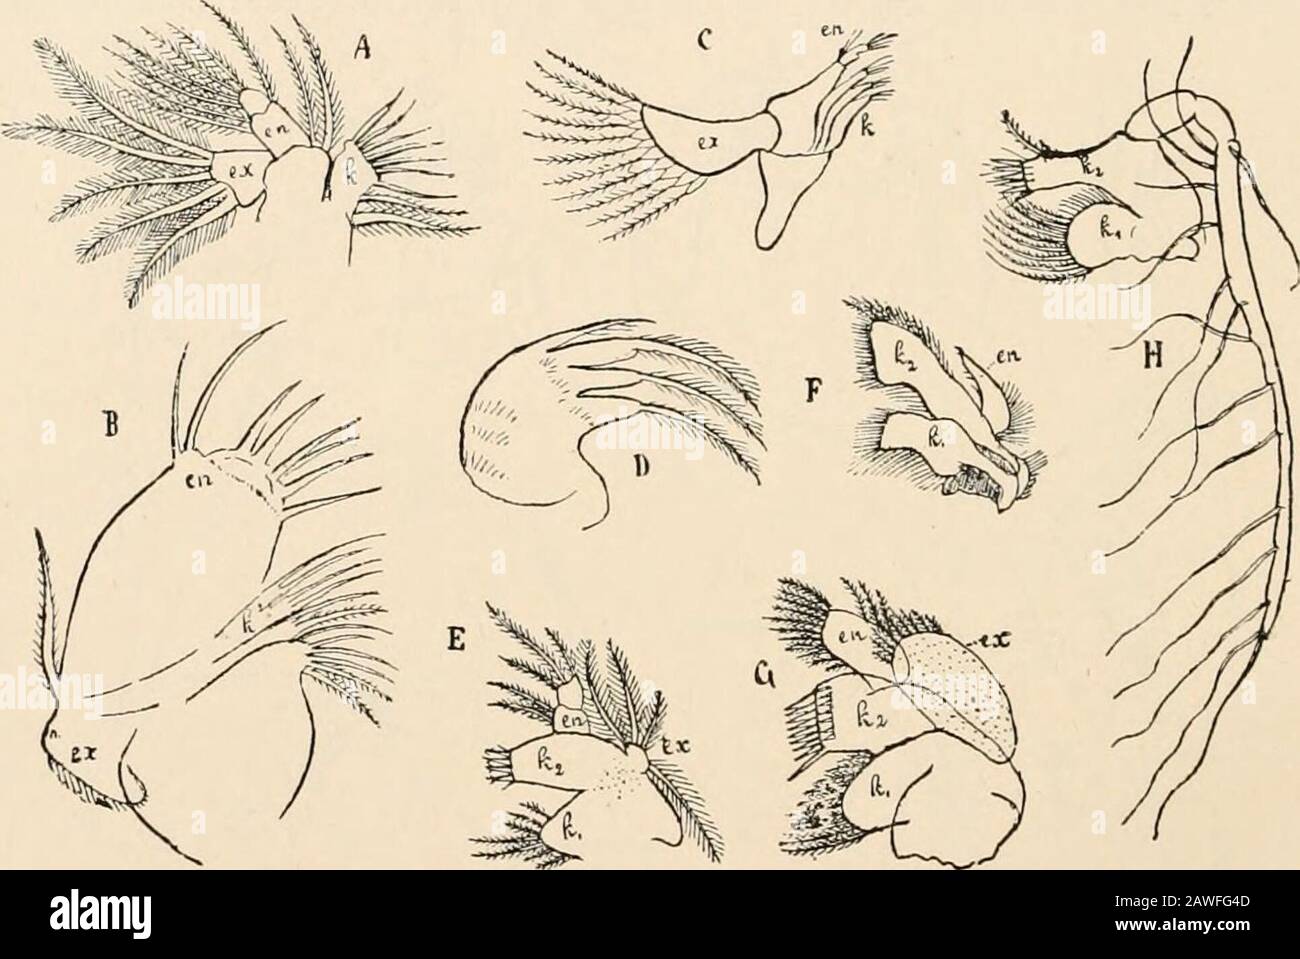 Text-book of comparative anatomy . to the protopodite, while the last tworepresent the joints of the endopodite. The feeler may here and there be wanting ;it is entirely wanting in the Cumacea (G). We see from the above review that among all Crustacea only the Ostracoda and 312 COMPARATIVE AX ATOMY CHAP. the Copepoda (more especially the latter) still retain in the structure of the man-dibles the original typical biramose form, since they alone retain the exopodite in theadult animal. d. The Anterior Maxillse (Fig. 212). These lie, in all Crustaceans, close to the mouth, and serve chieflyfor m Stock Photo